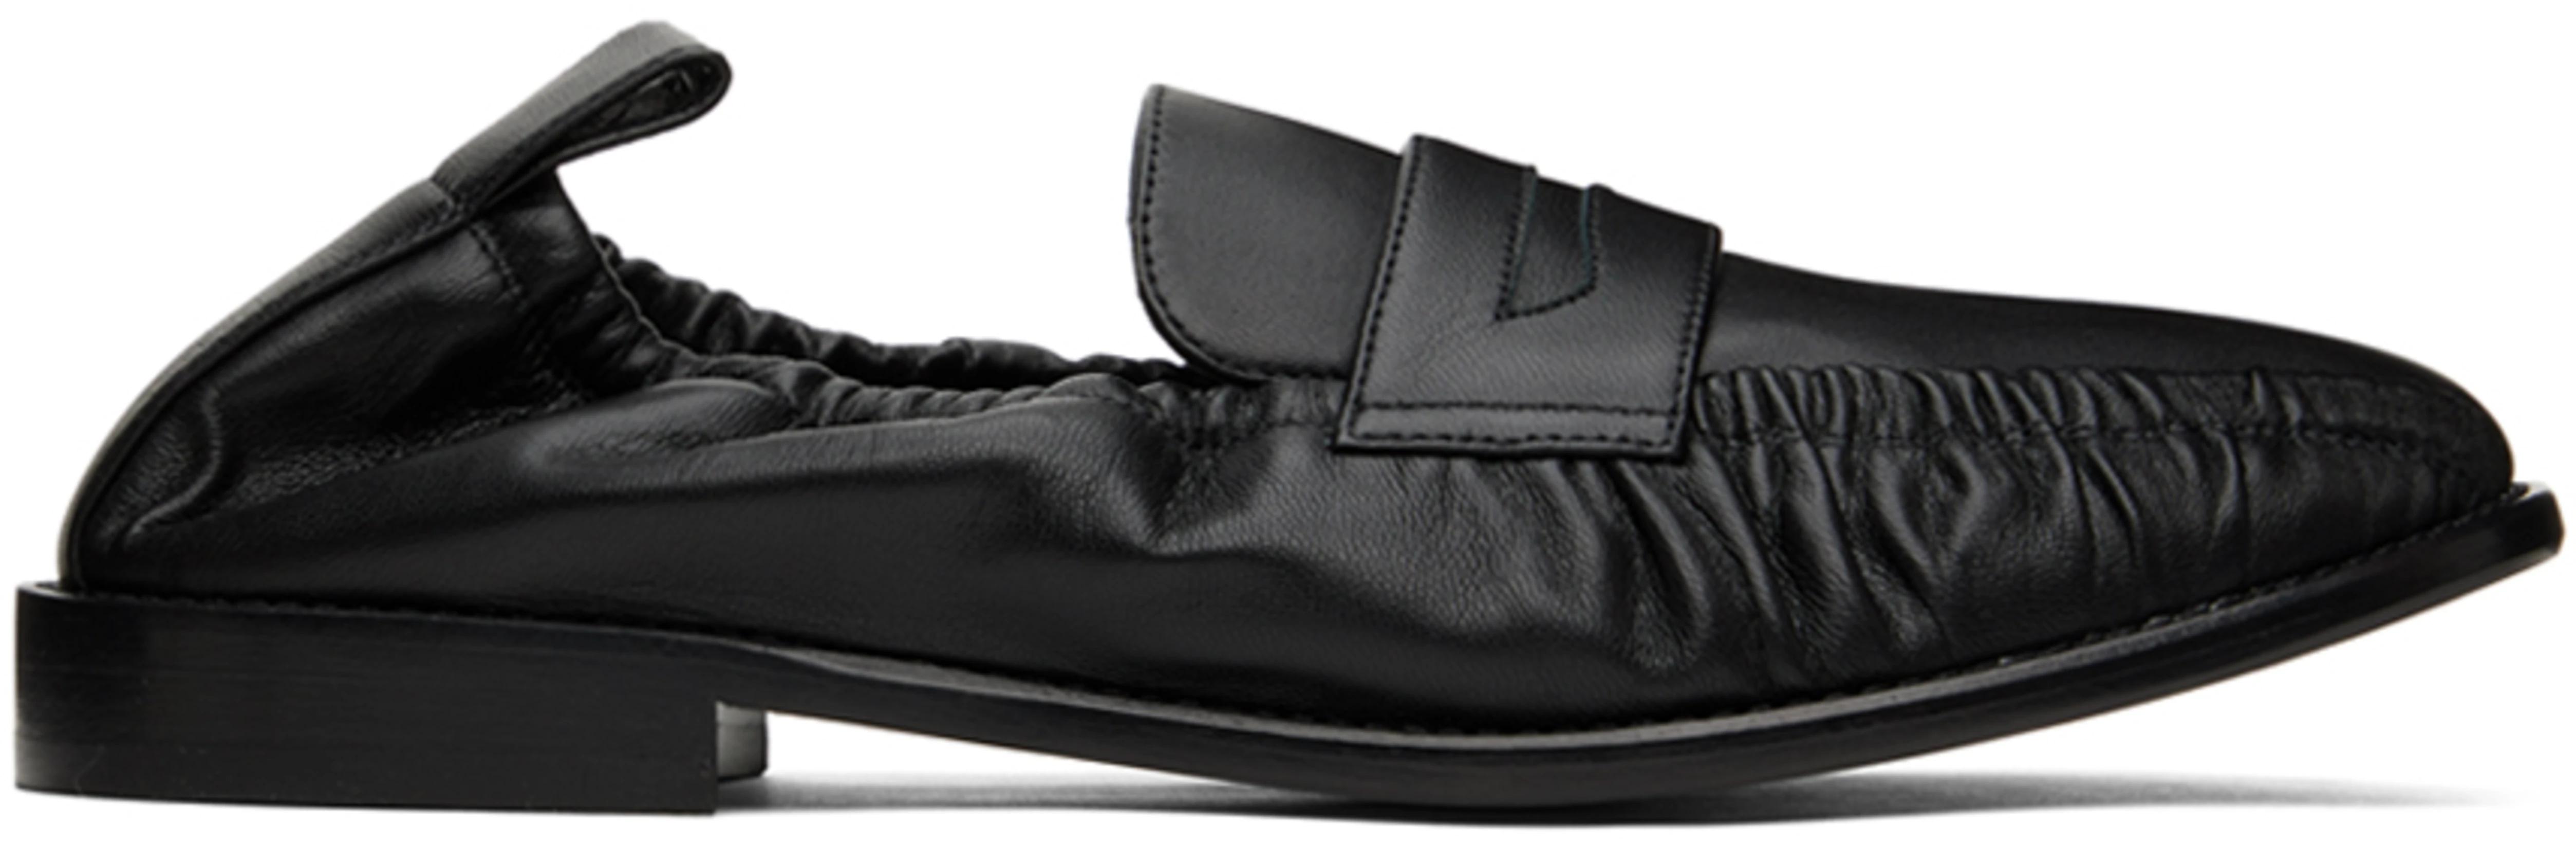 Black Leather Loafers by CO